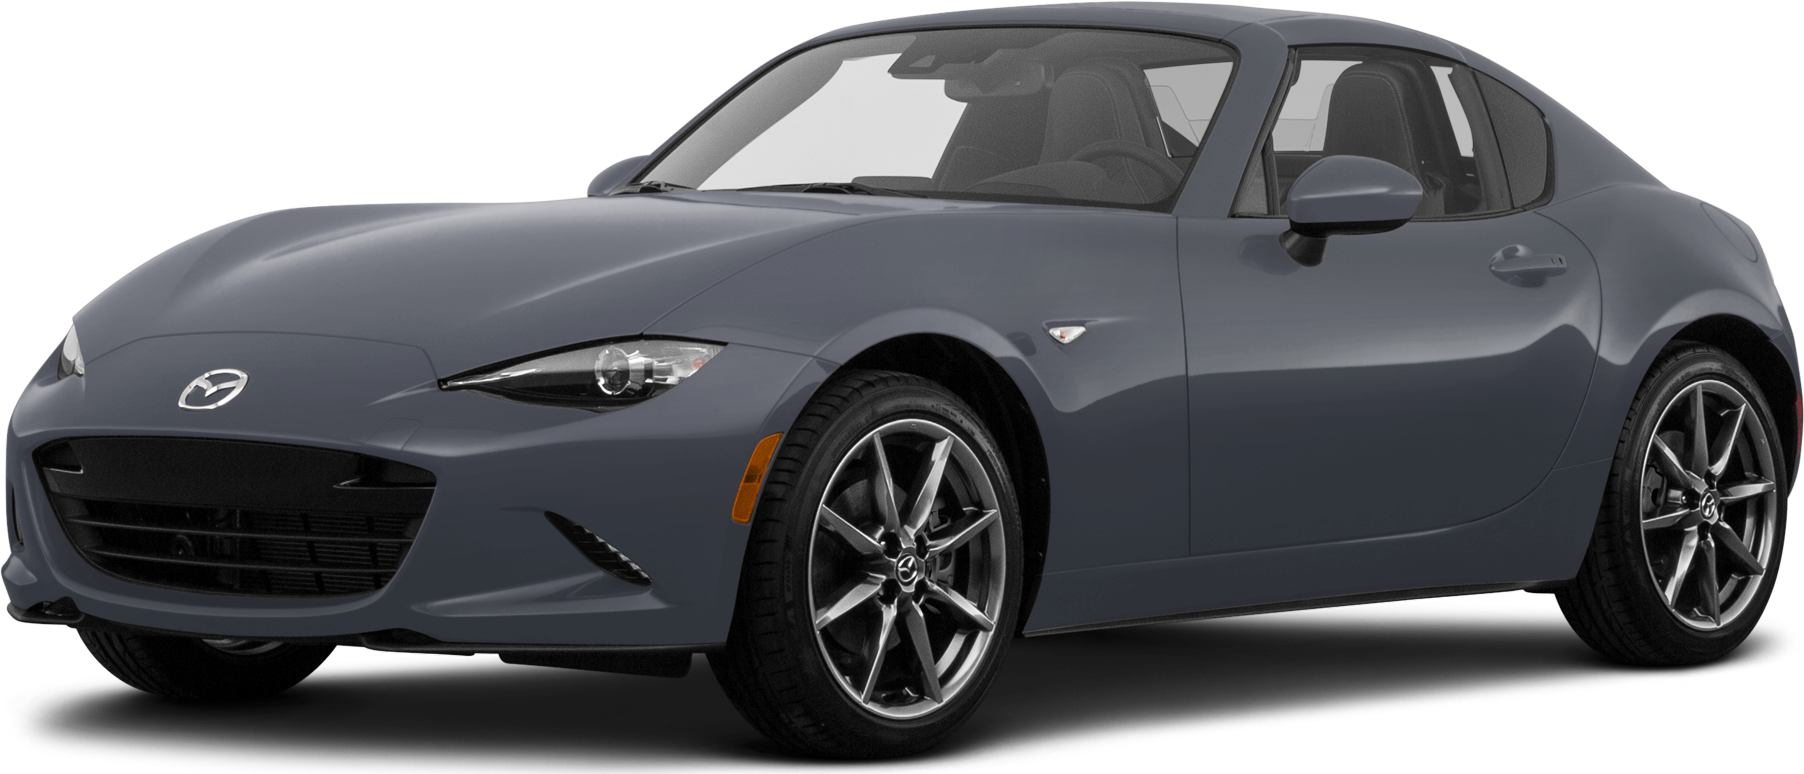 How The 2025 Mazda Miata Could Reshape The Budget Sports Car Market